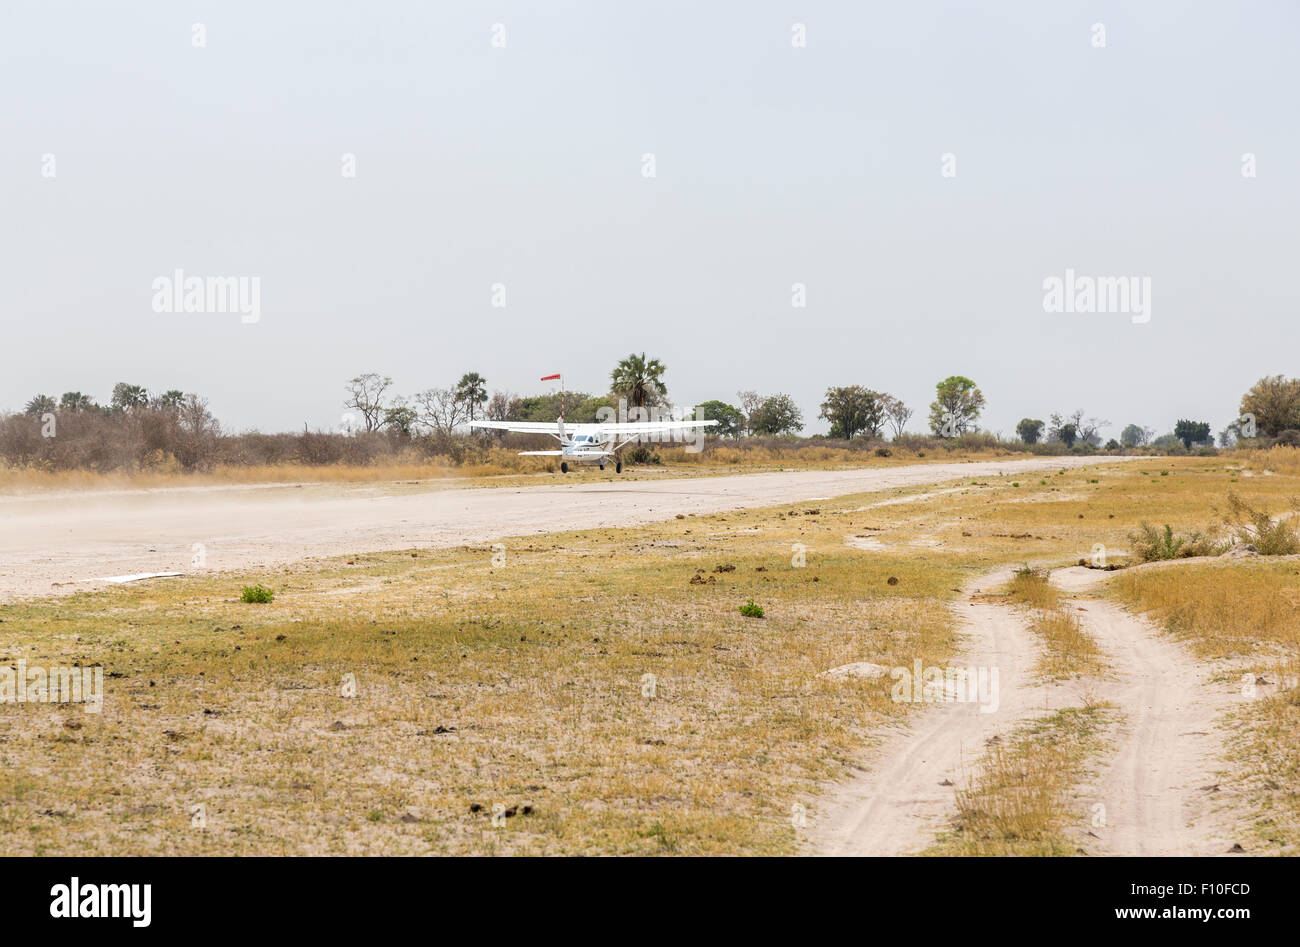 A Mack Air light aircraft taking off from an airstrip at Duba Plains, Okavango Delta, north Botswana, southern Africa Stock Photo